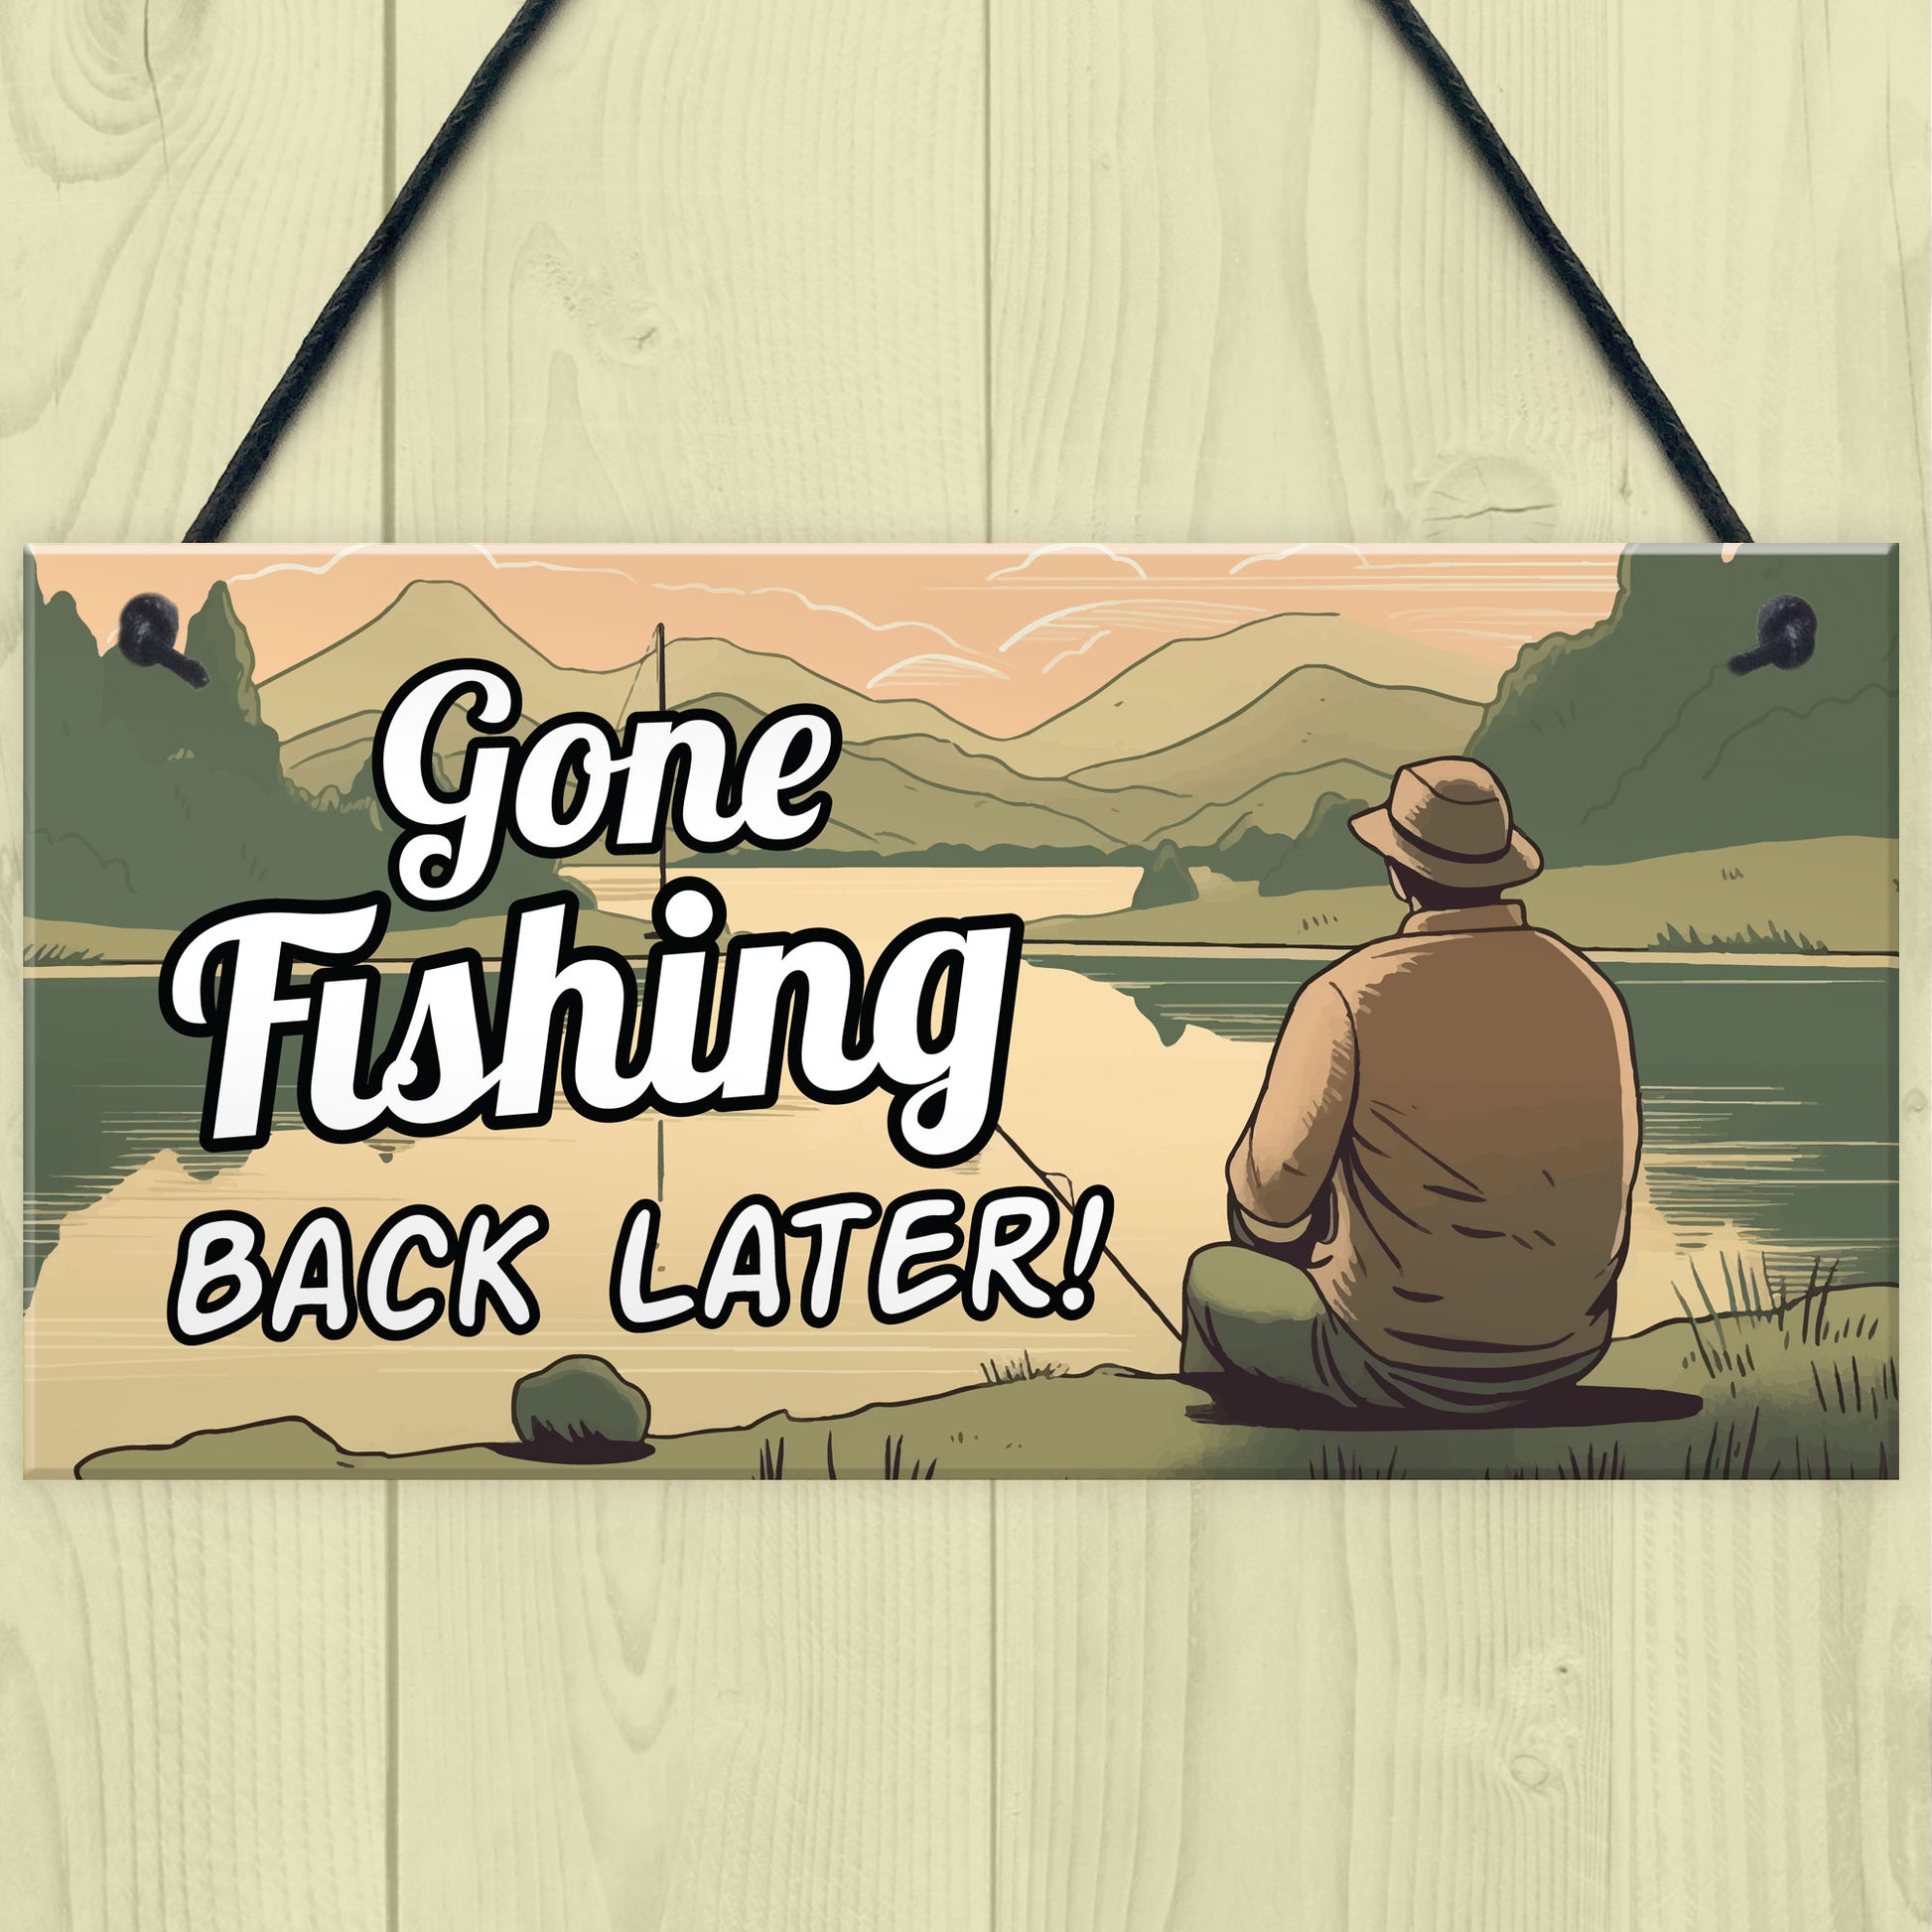 Gone Fishing Hanging Plaque Novelty Fishing Gifts For Men Dad